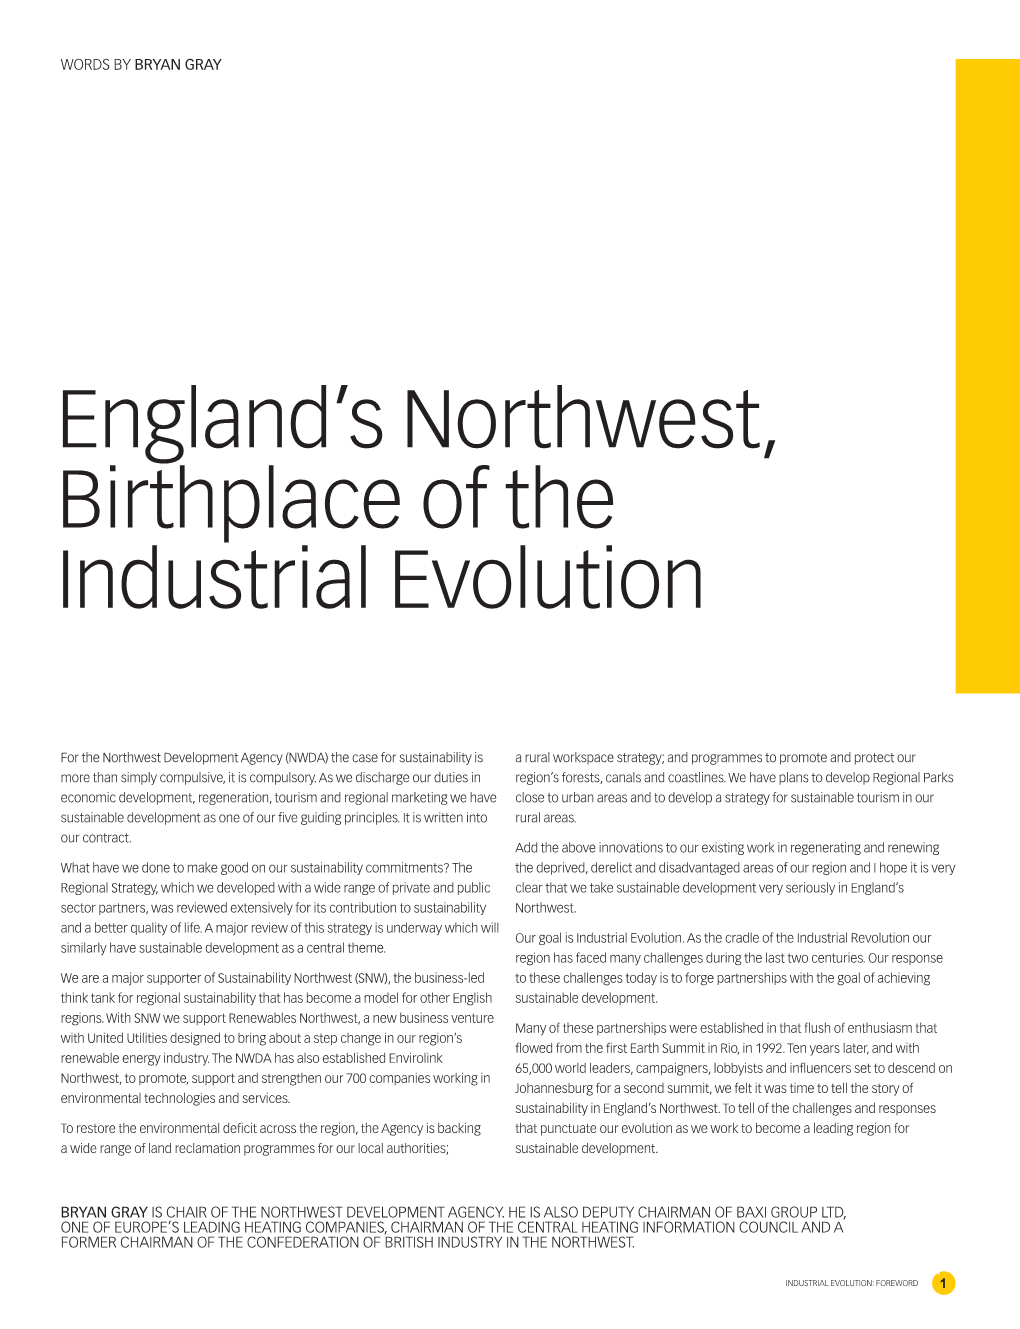 England's Northwest, Birthplace of the Industrial Evolution